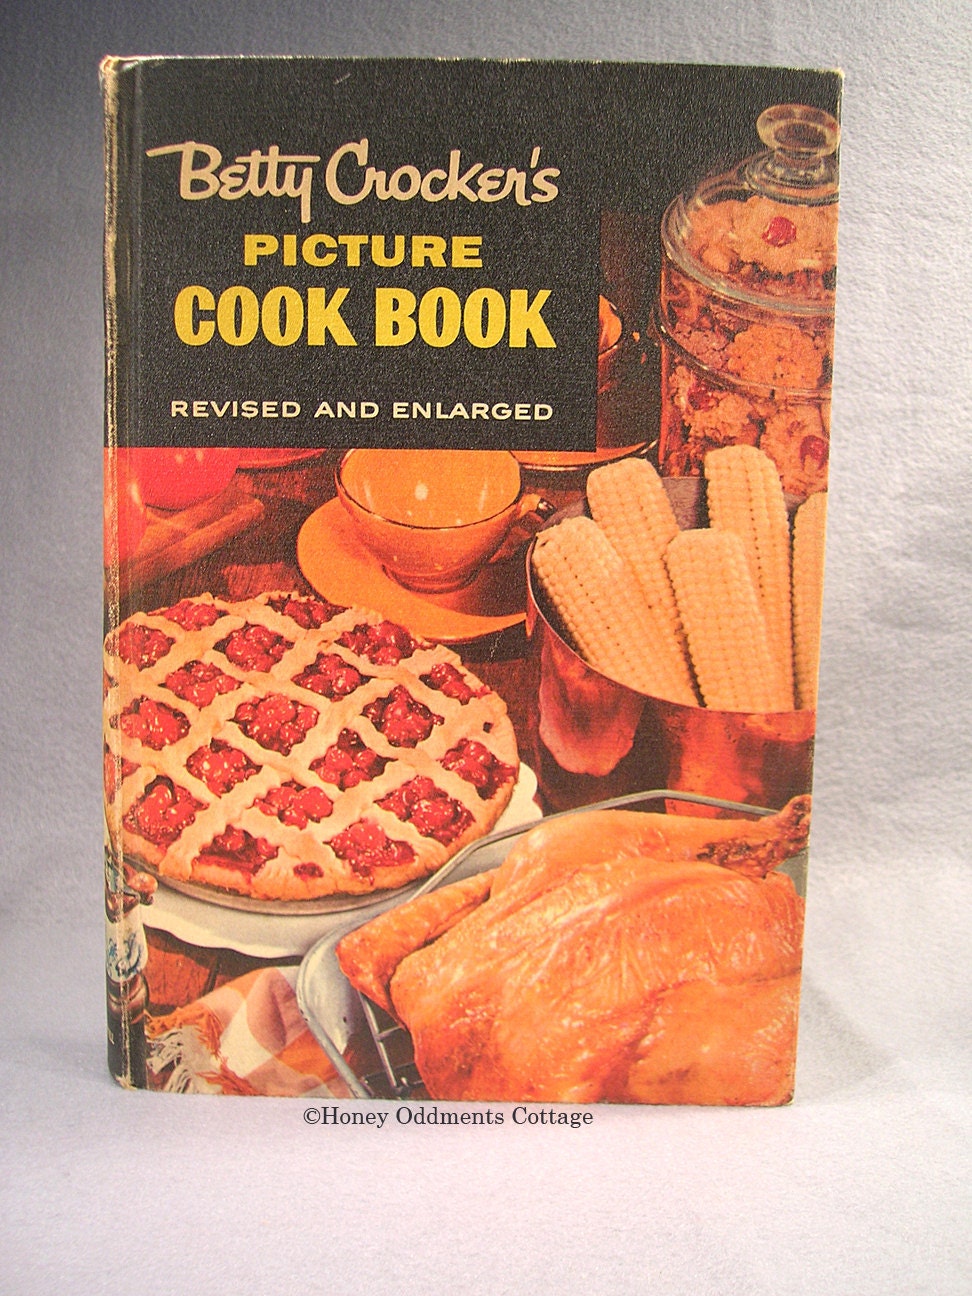 Betty Crocker's Picture Cookbook 1956 Second Edition First